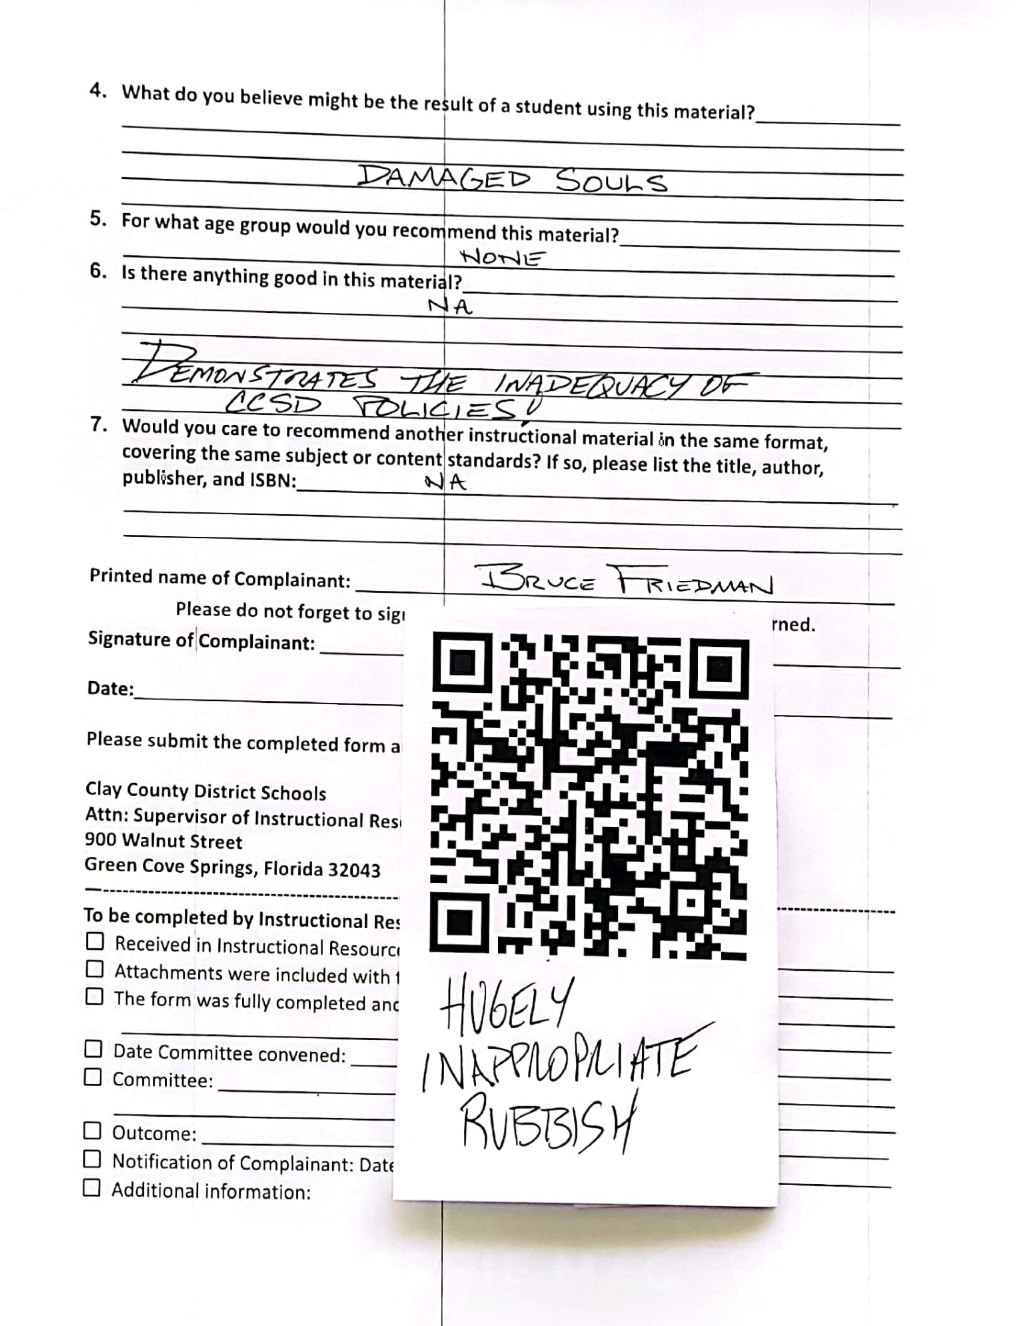 bruce friedman book complaint form for clay county district schools. 